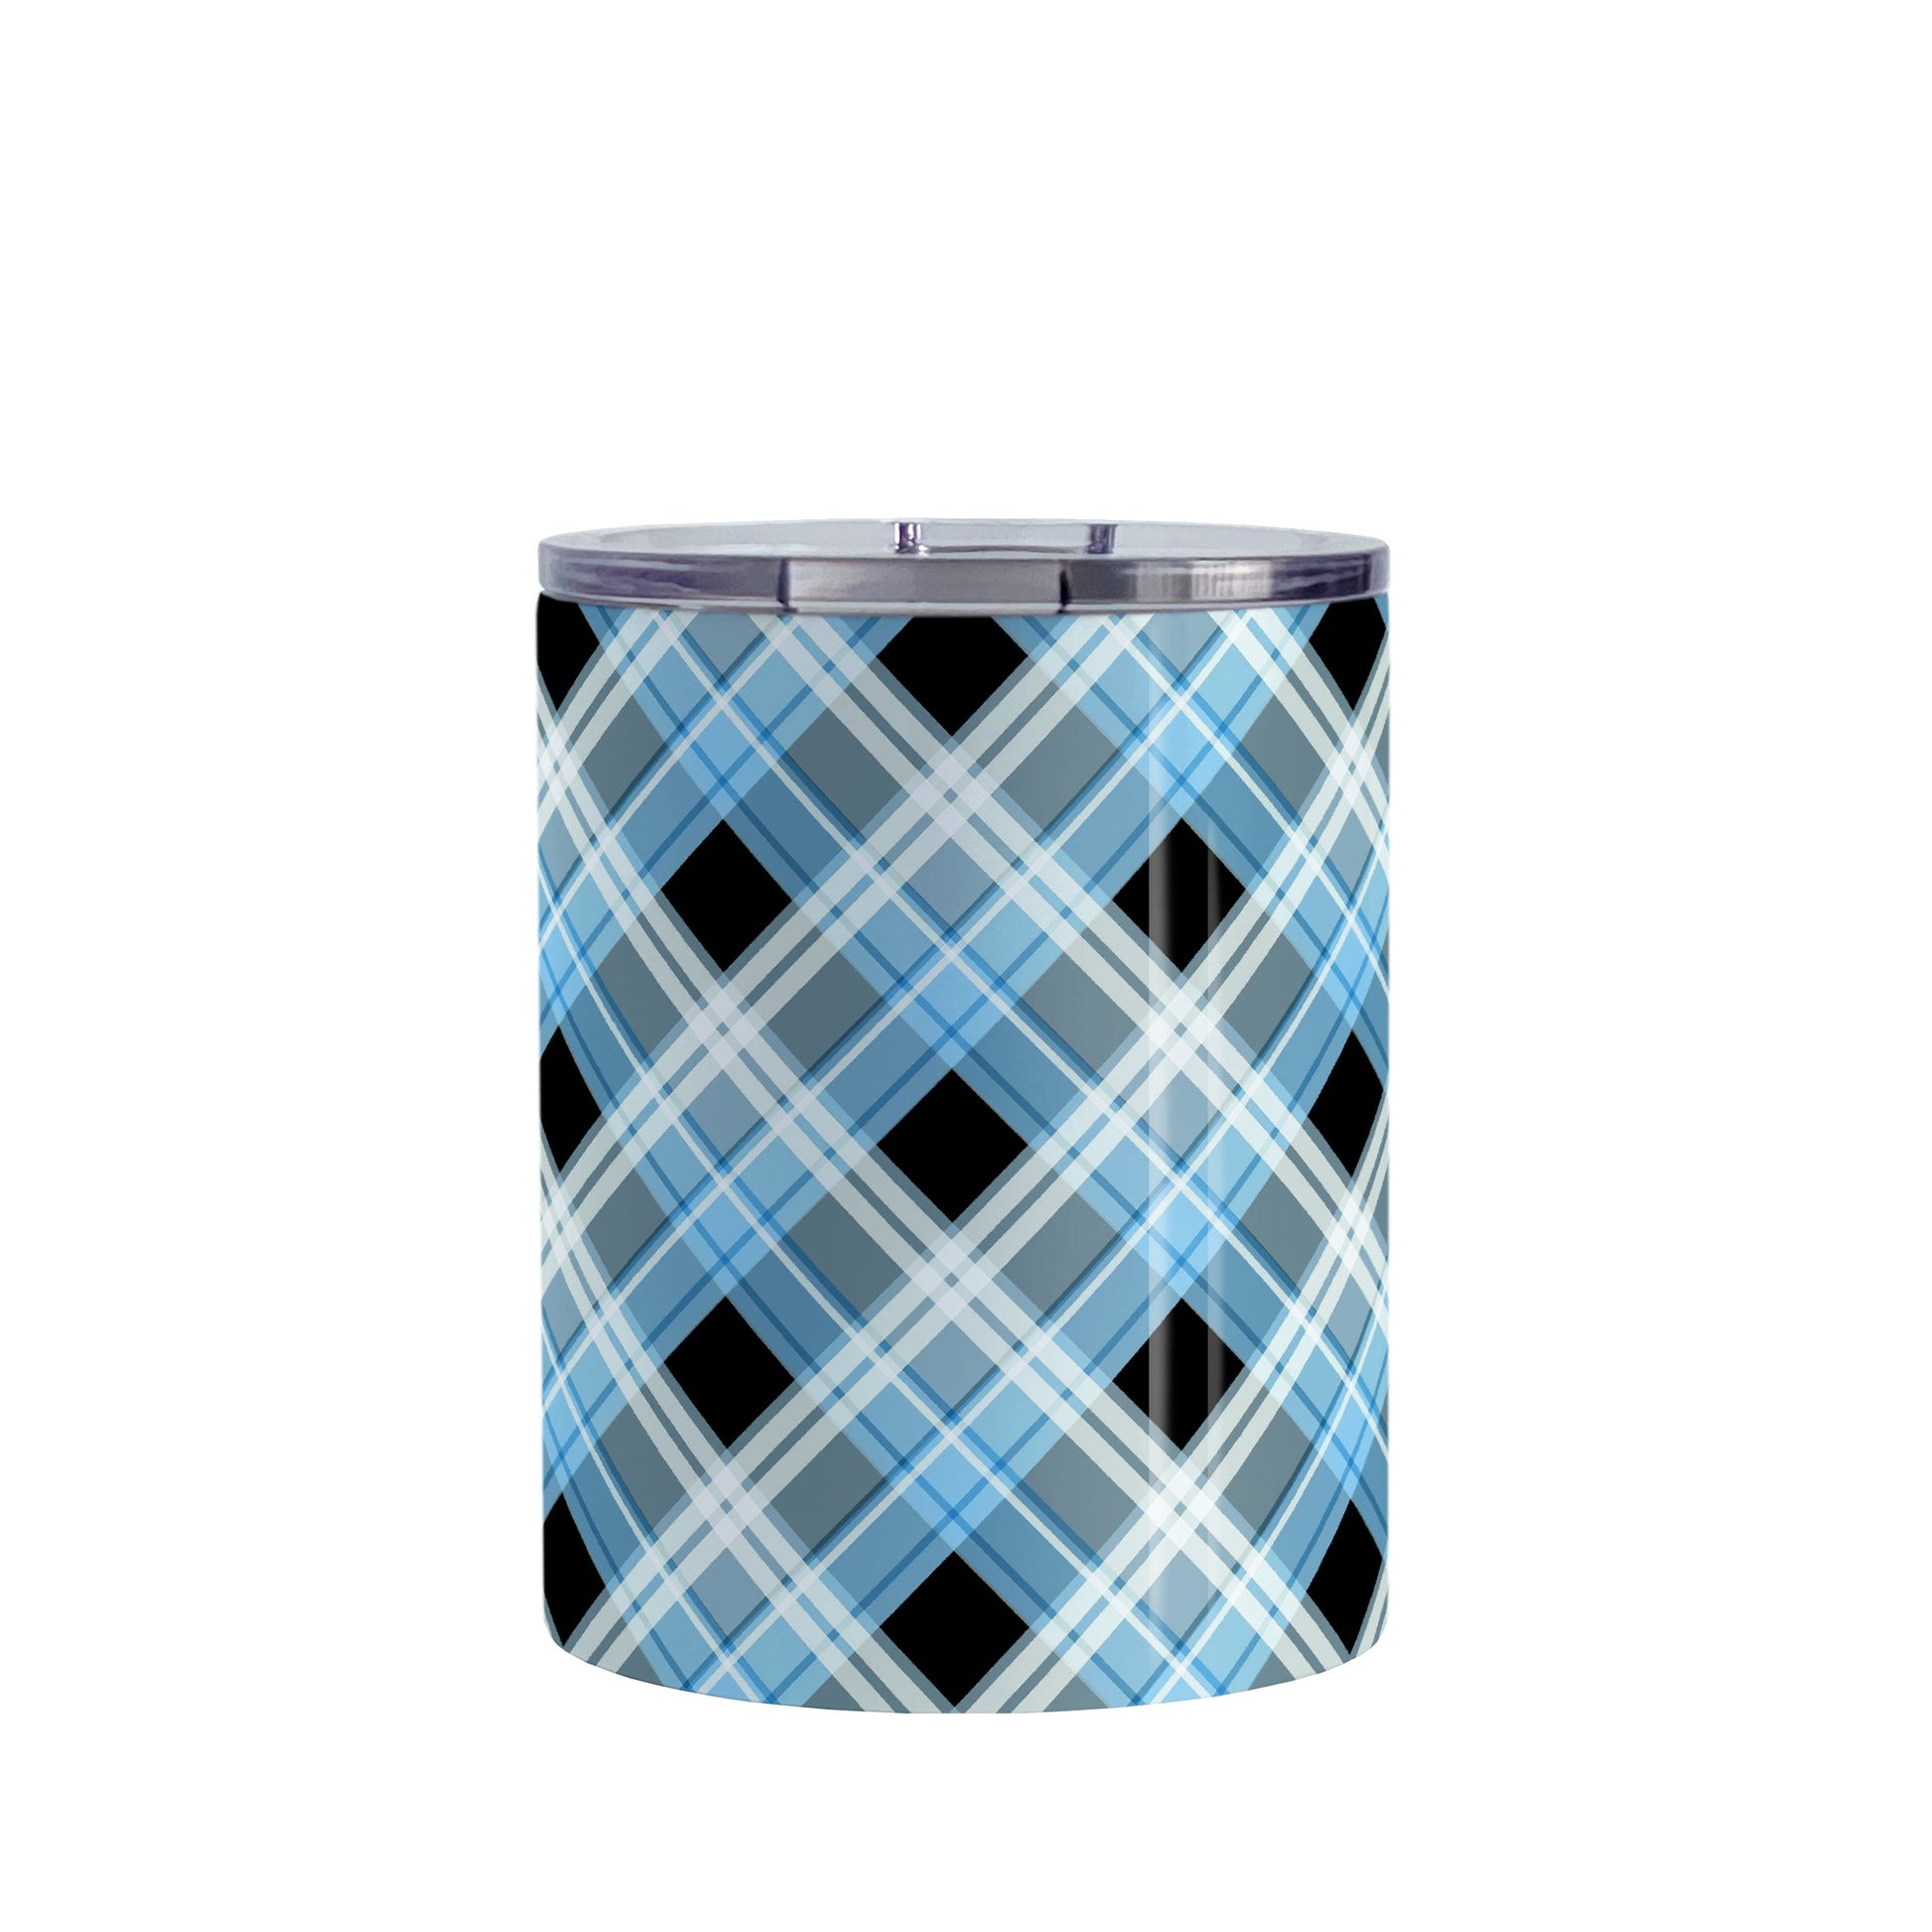 Alternative Black and Blue Plaid Tumbler Cup (10oz) at Amy's Coffee Mugs. A stainless steel insulated tumbler cup designed with a diagonal blue, black, and white plaid pattern that wraps around the cup. A tumbler cup designed for someone who loves plaid patterns and the colors blue and black together.